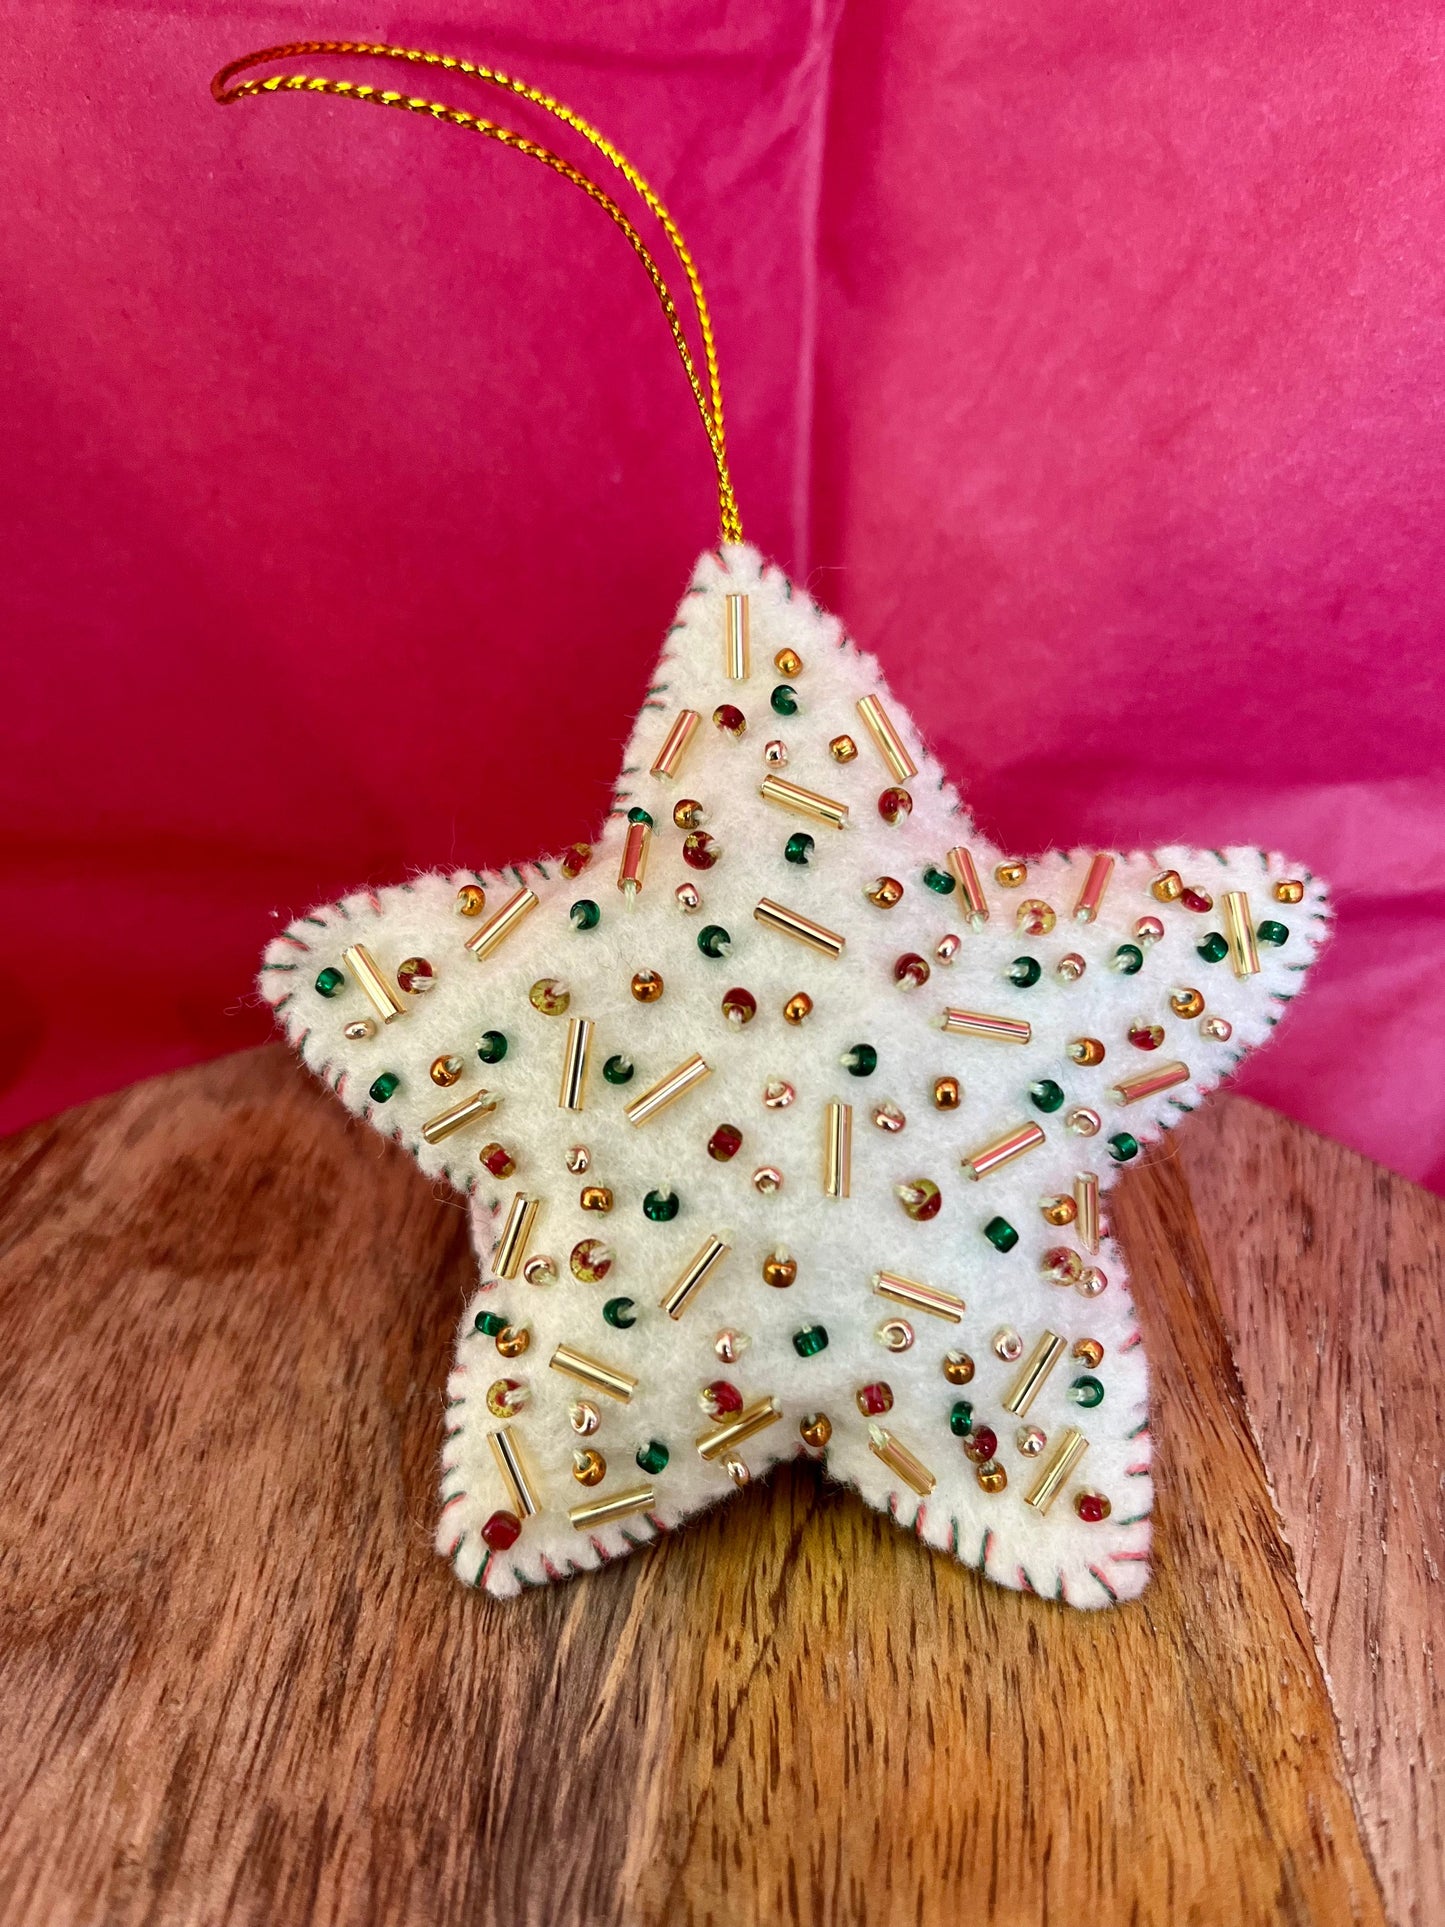 Embroidered Stars & Moon Ornaments ornaments from GemCadet